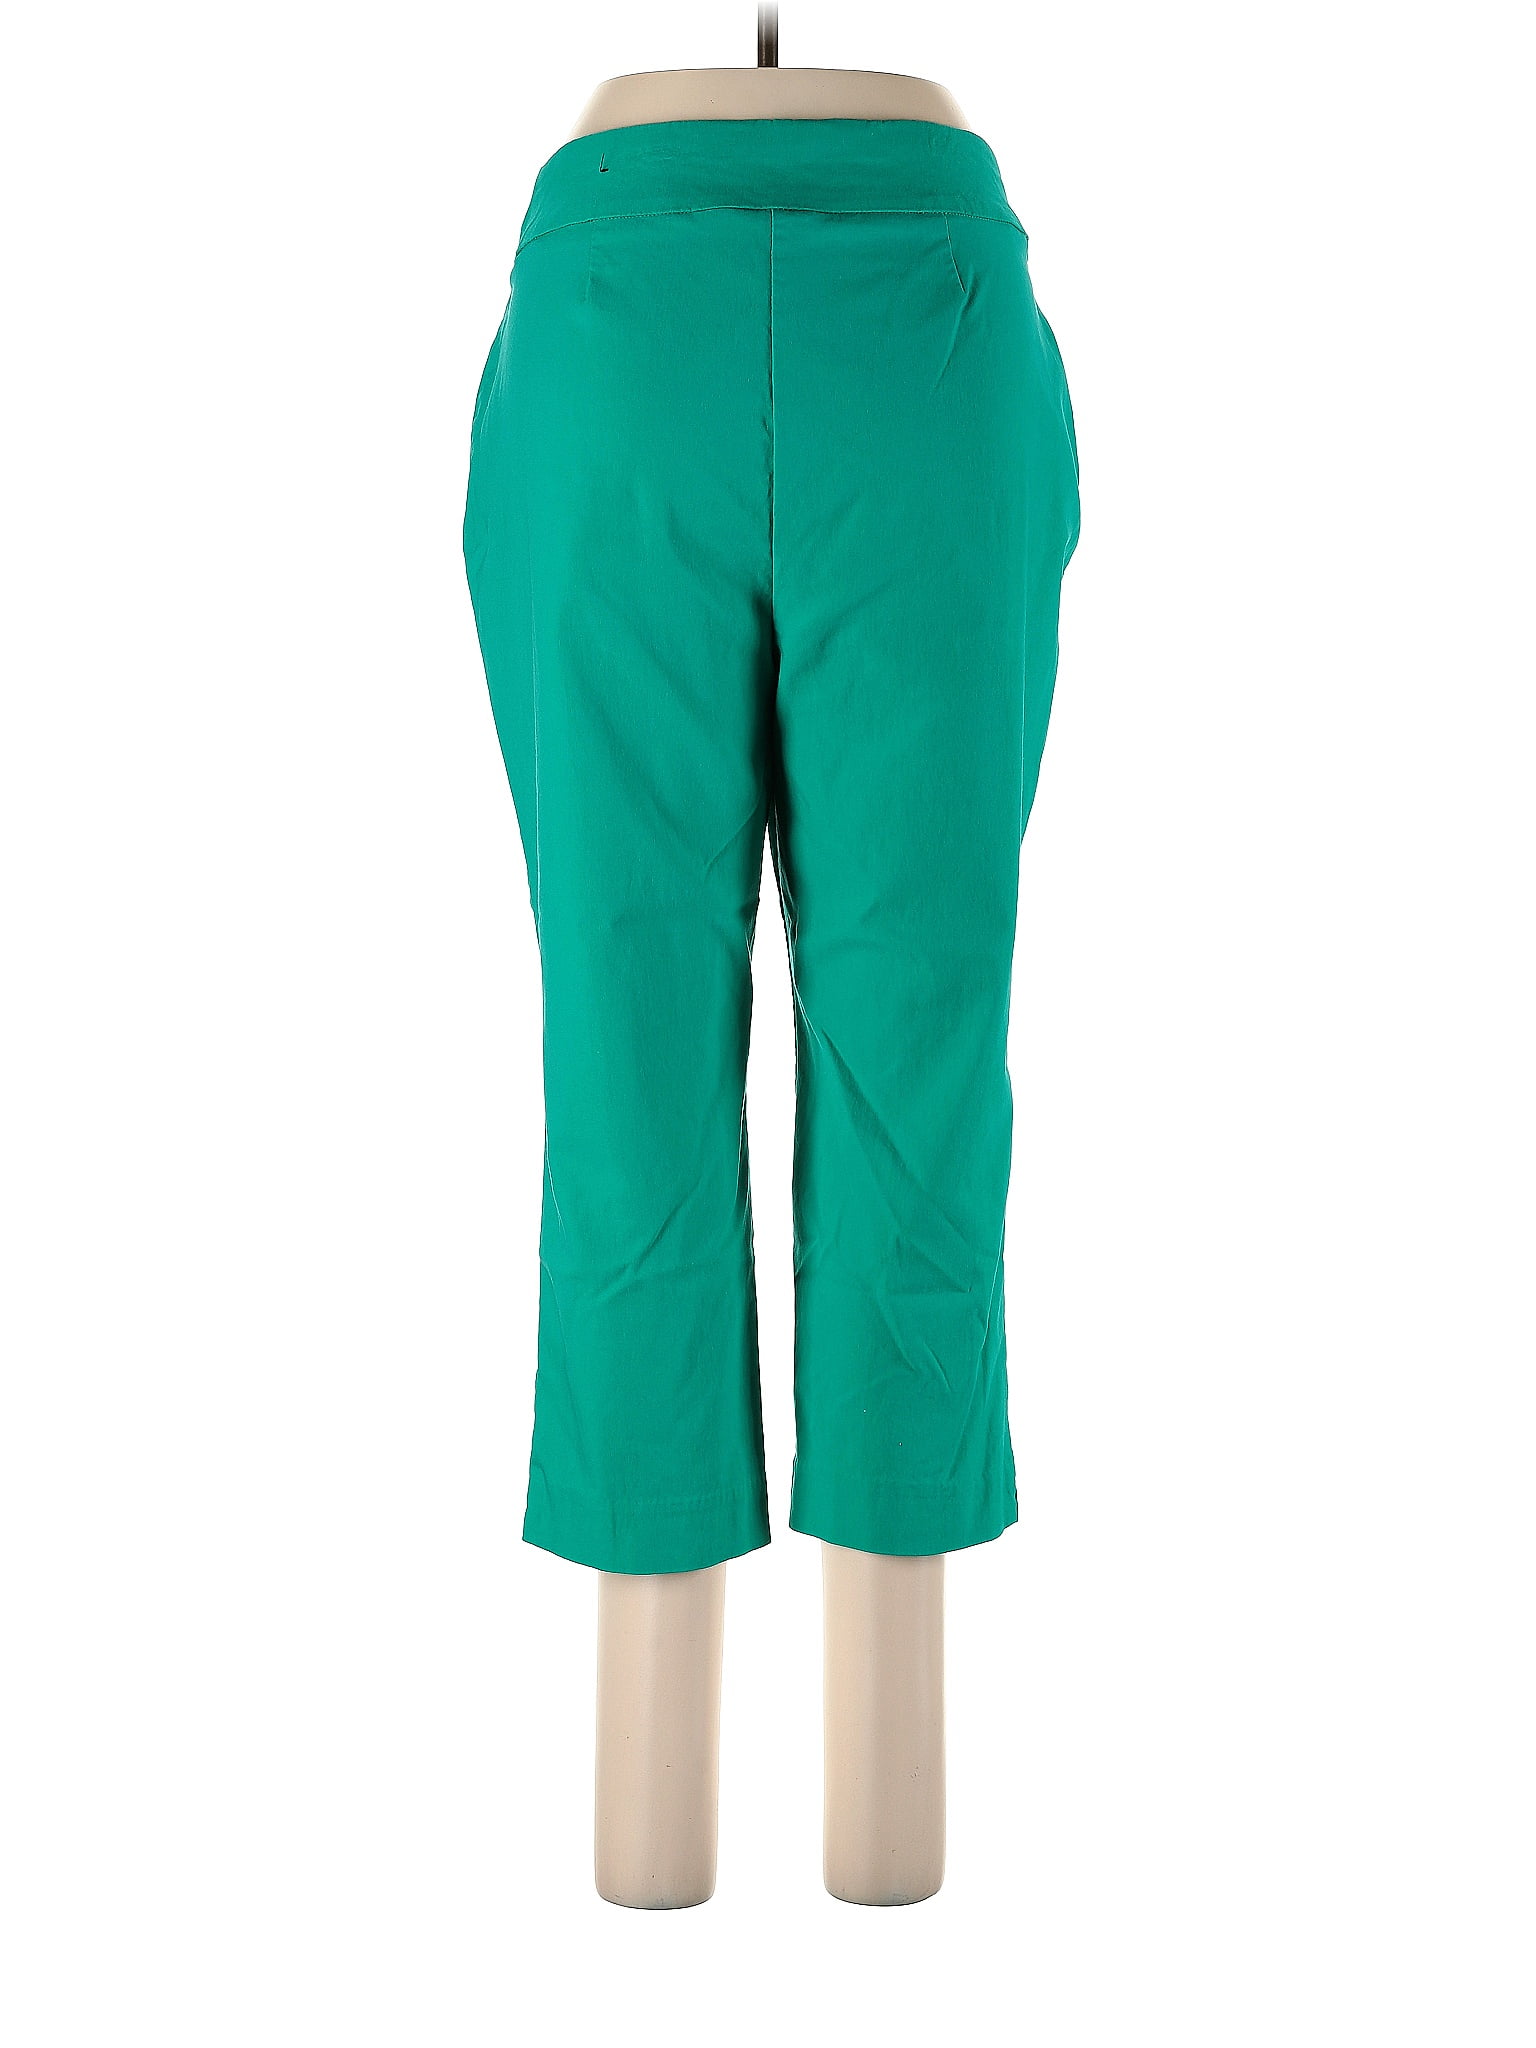 So Slimming by Chico's Solid Green Teal Casual Pants Size Lg